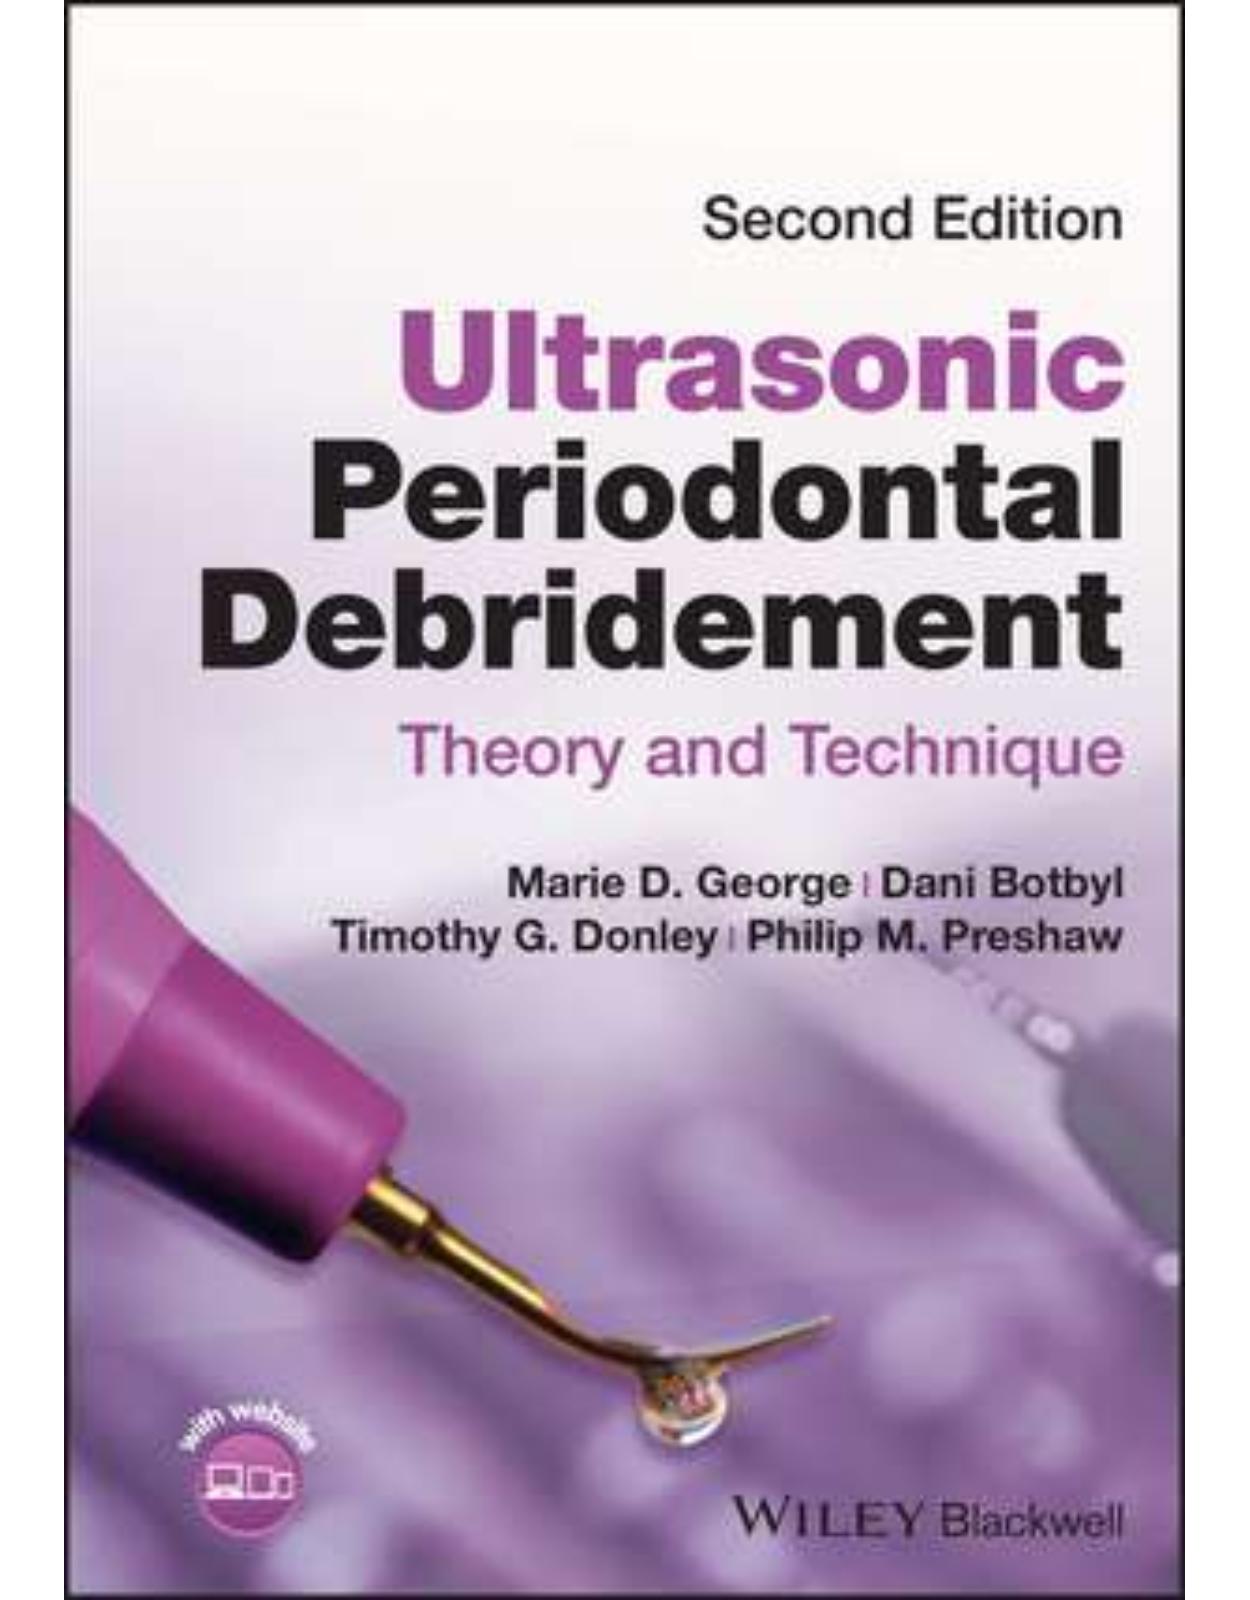 Ultrasonic Periodontal Debridement  Theory and Technique